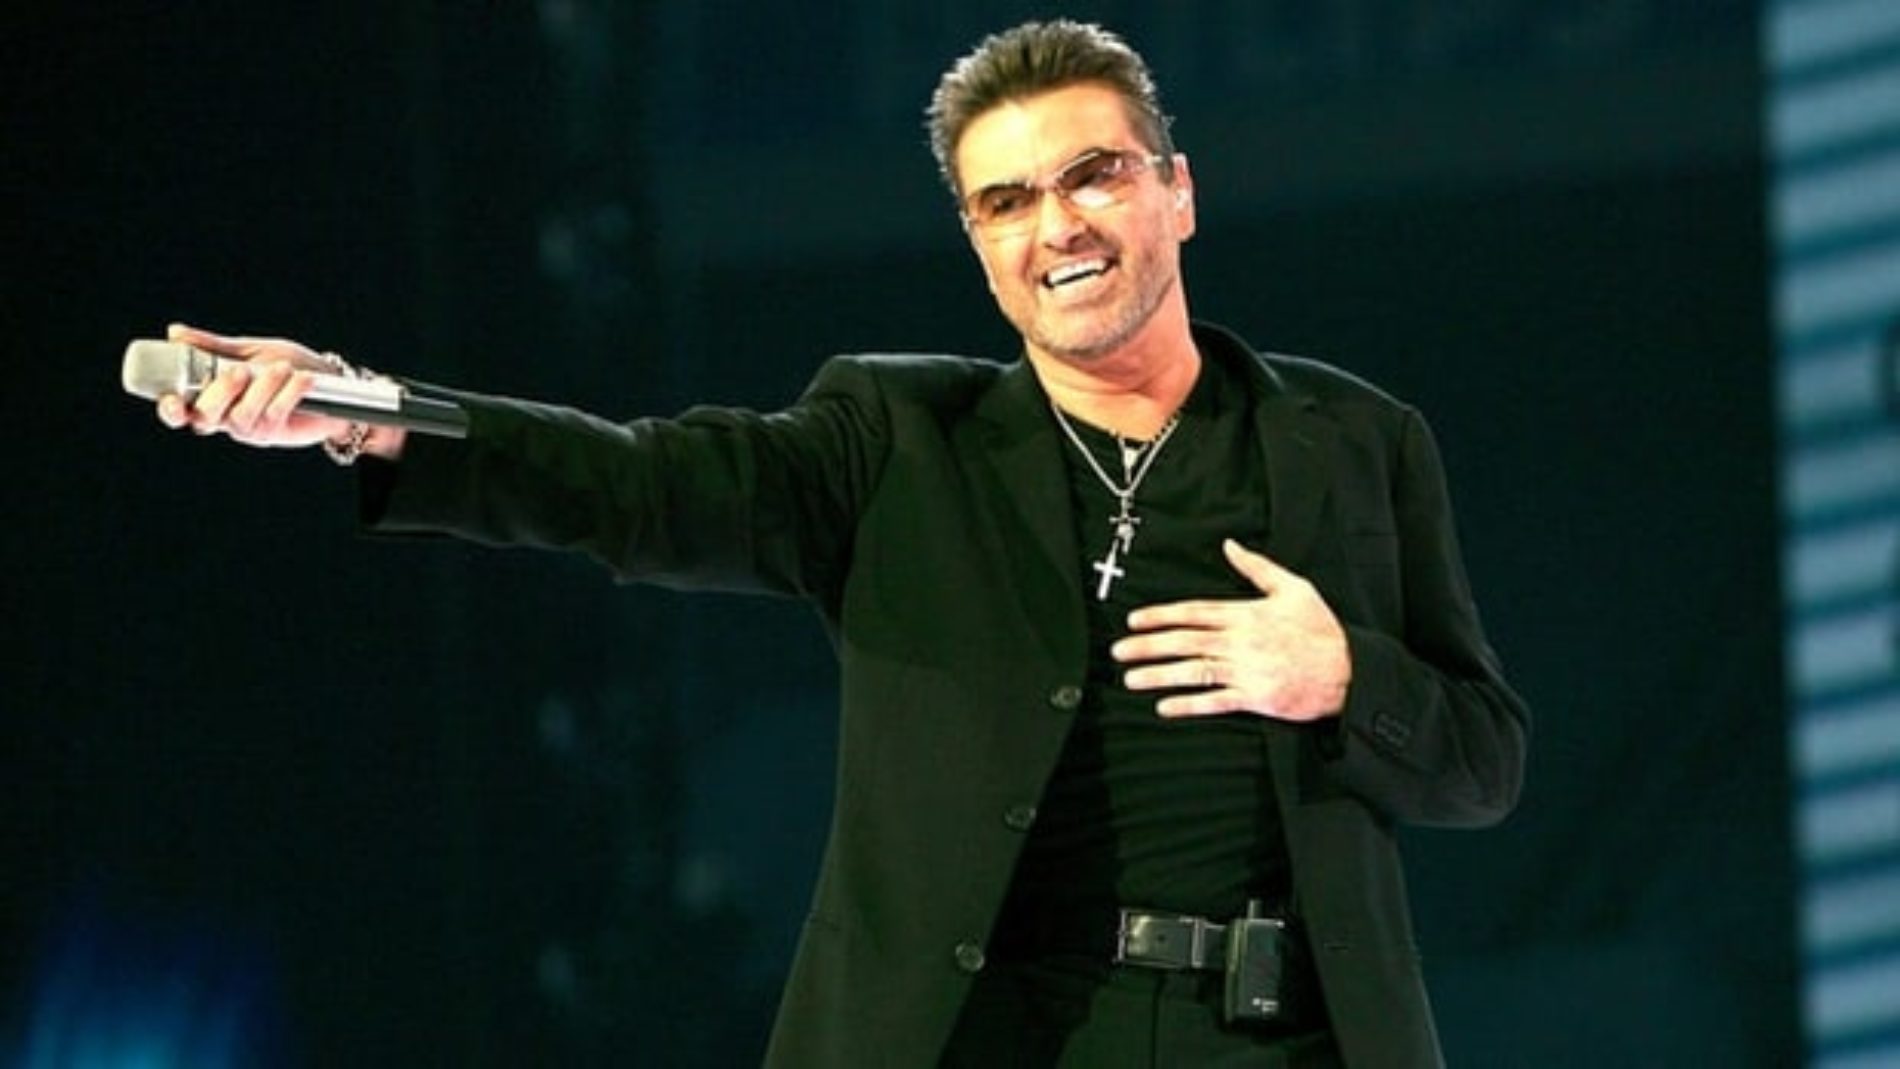 George Michael’s death prompts public grief and stories of his generosity